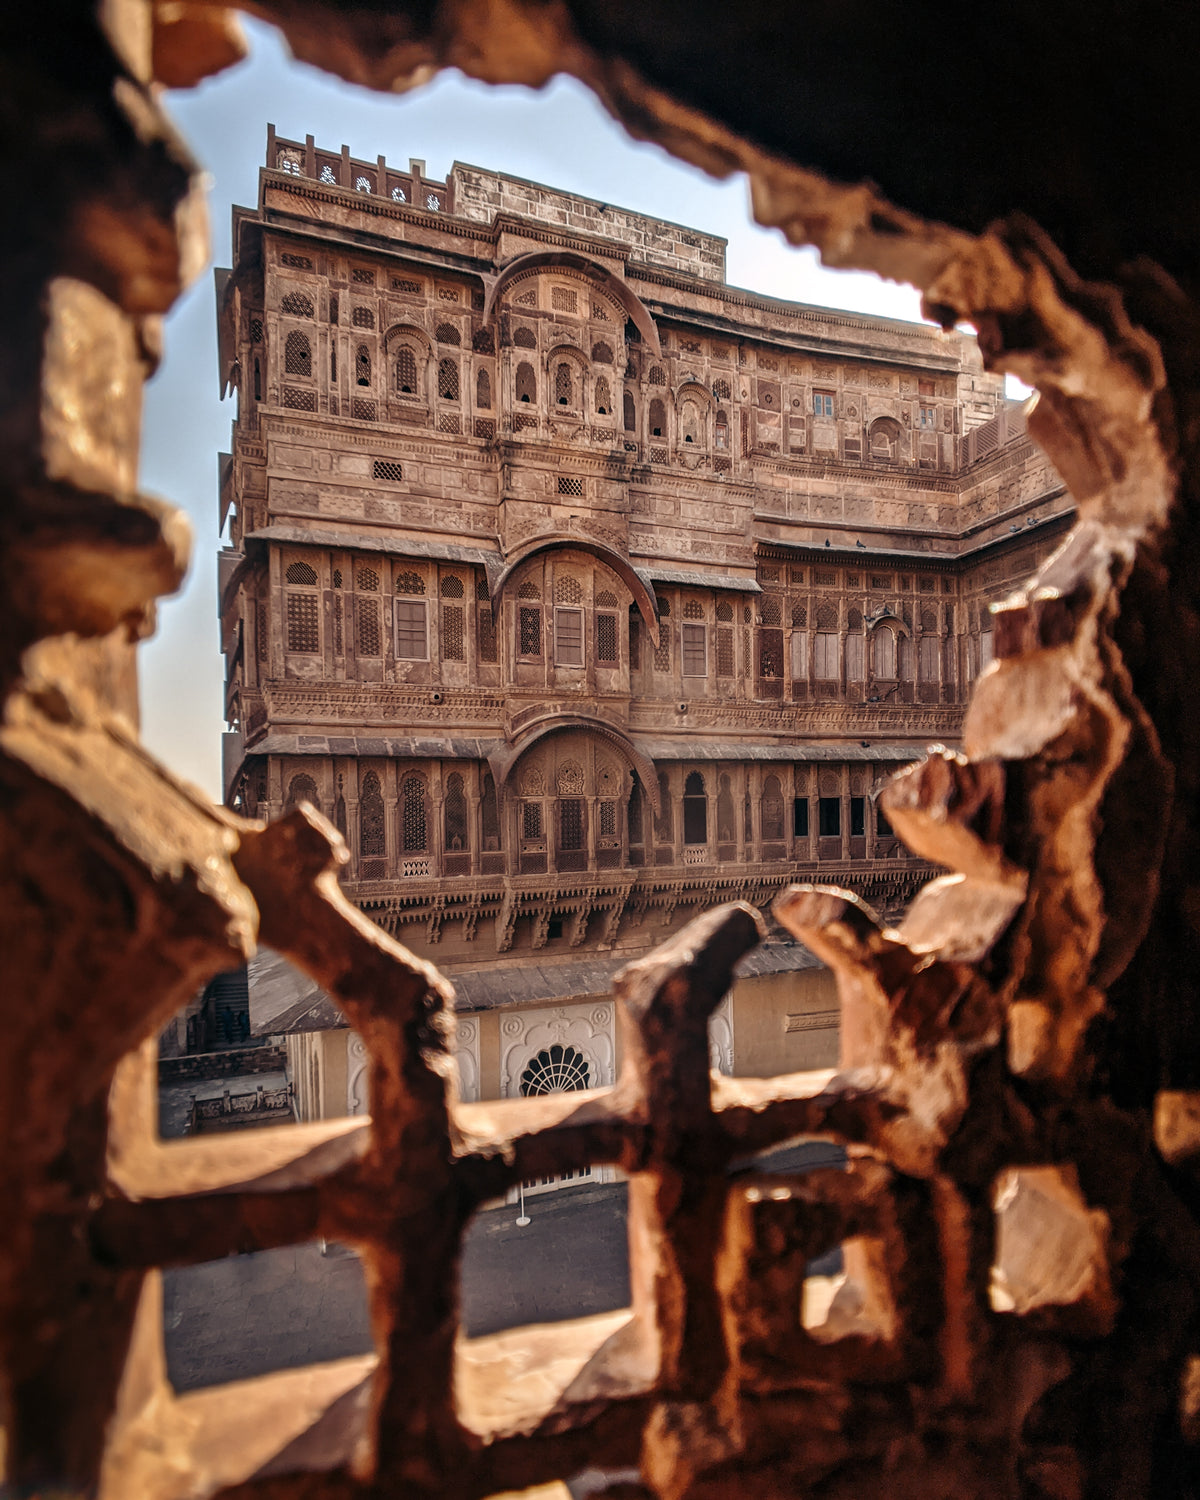 the mehrangarh fort and museum